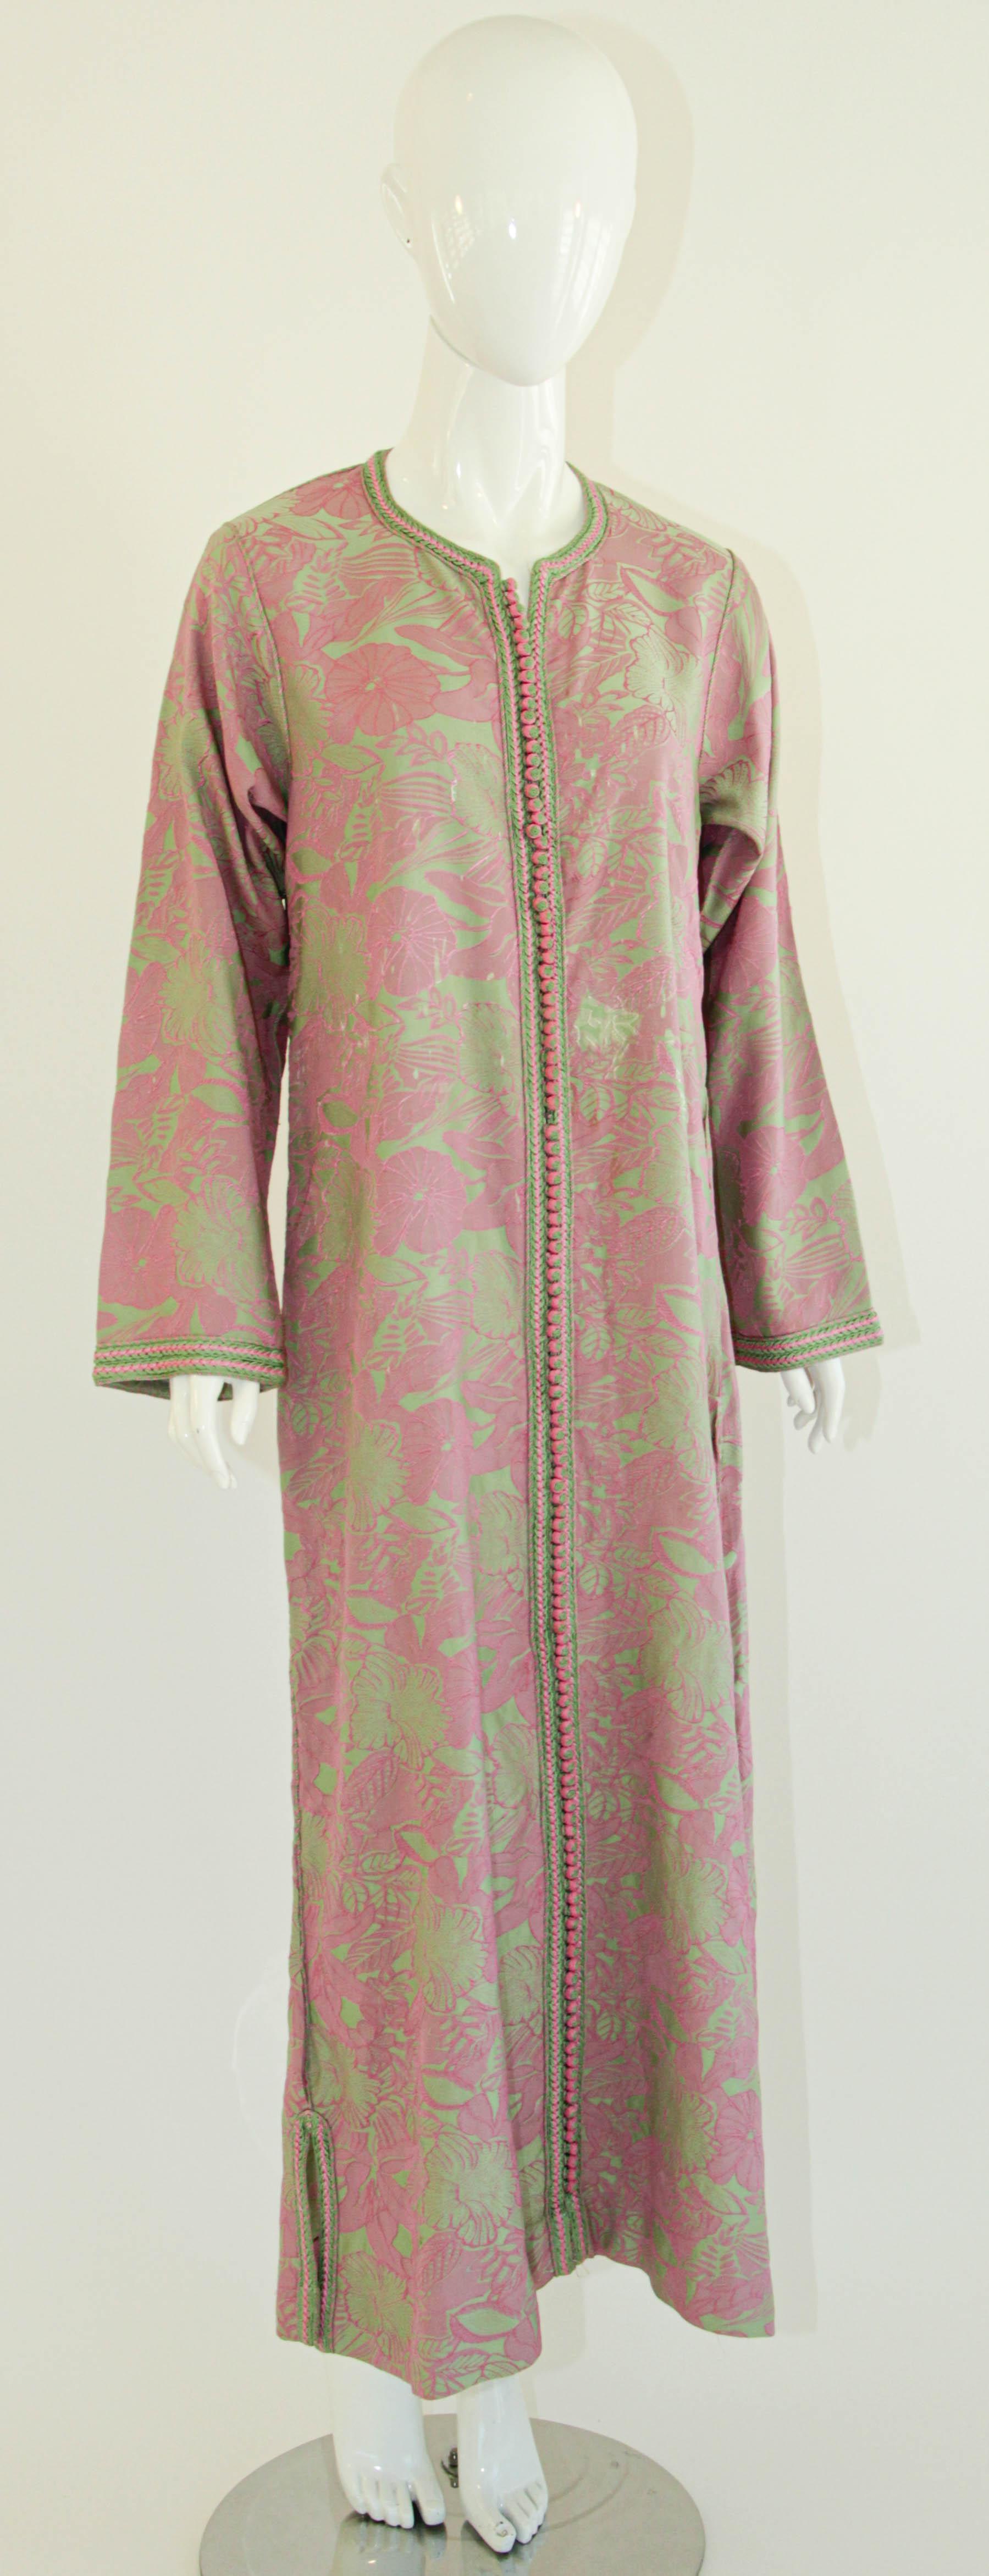 Moroccan Vintage Caftan Pink and Green Trim For Sale 1